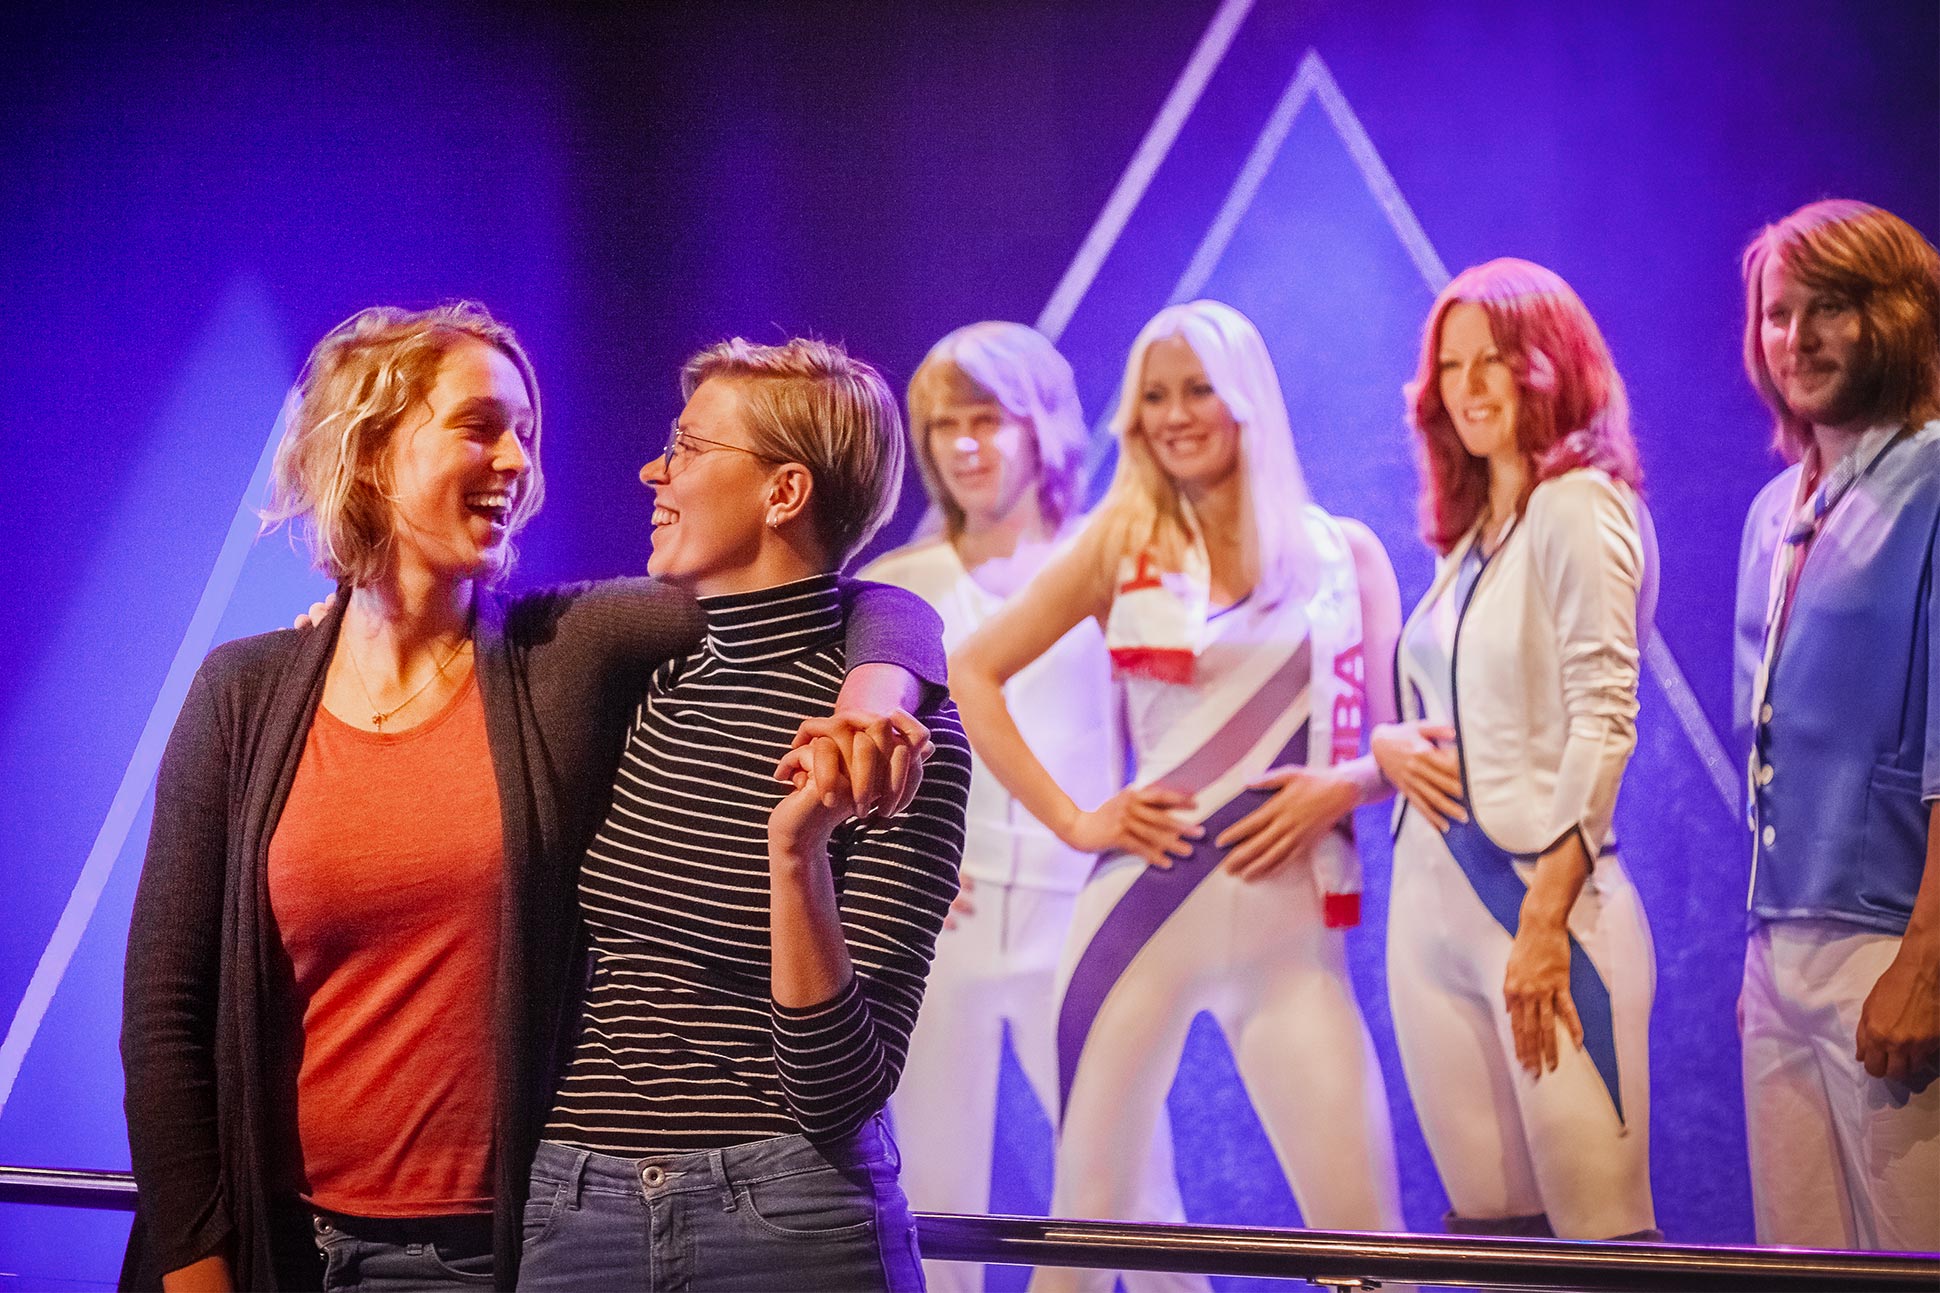 Instagrammers @onceuponajrny at ABBA The Museum, Stockholm, Sweden